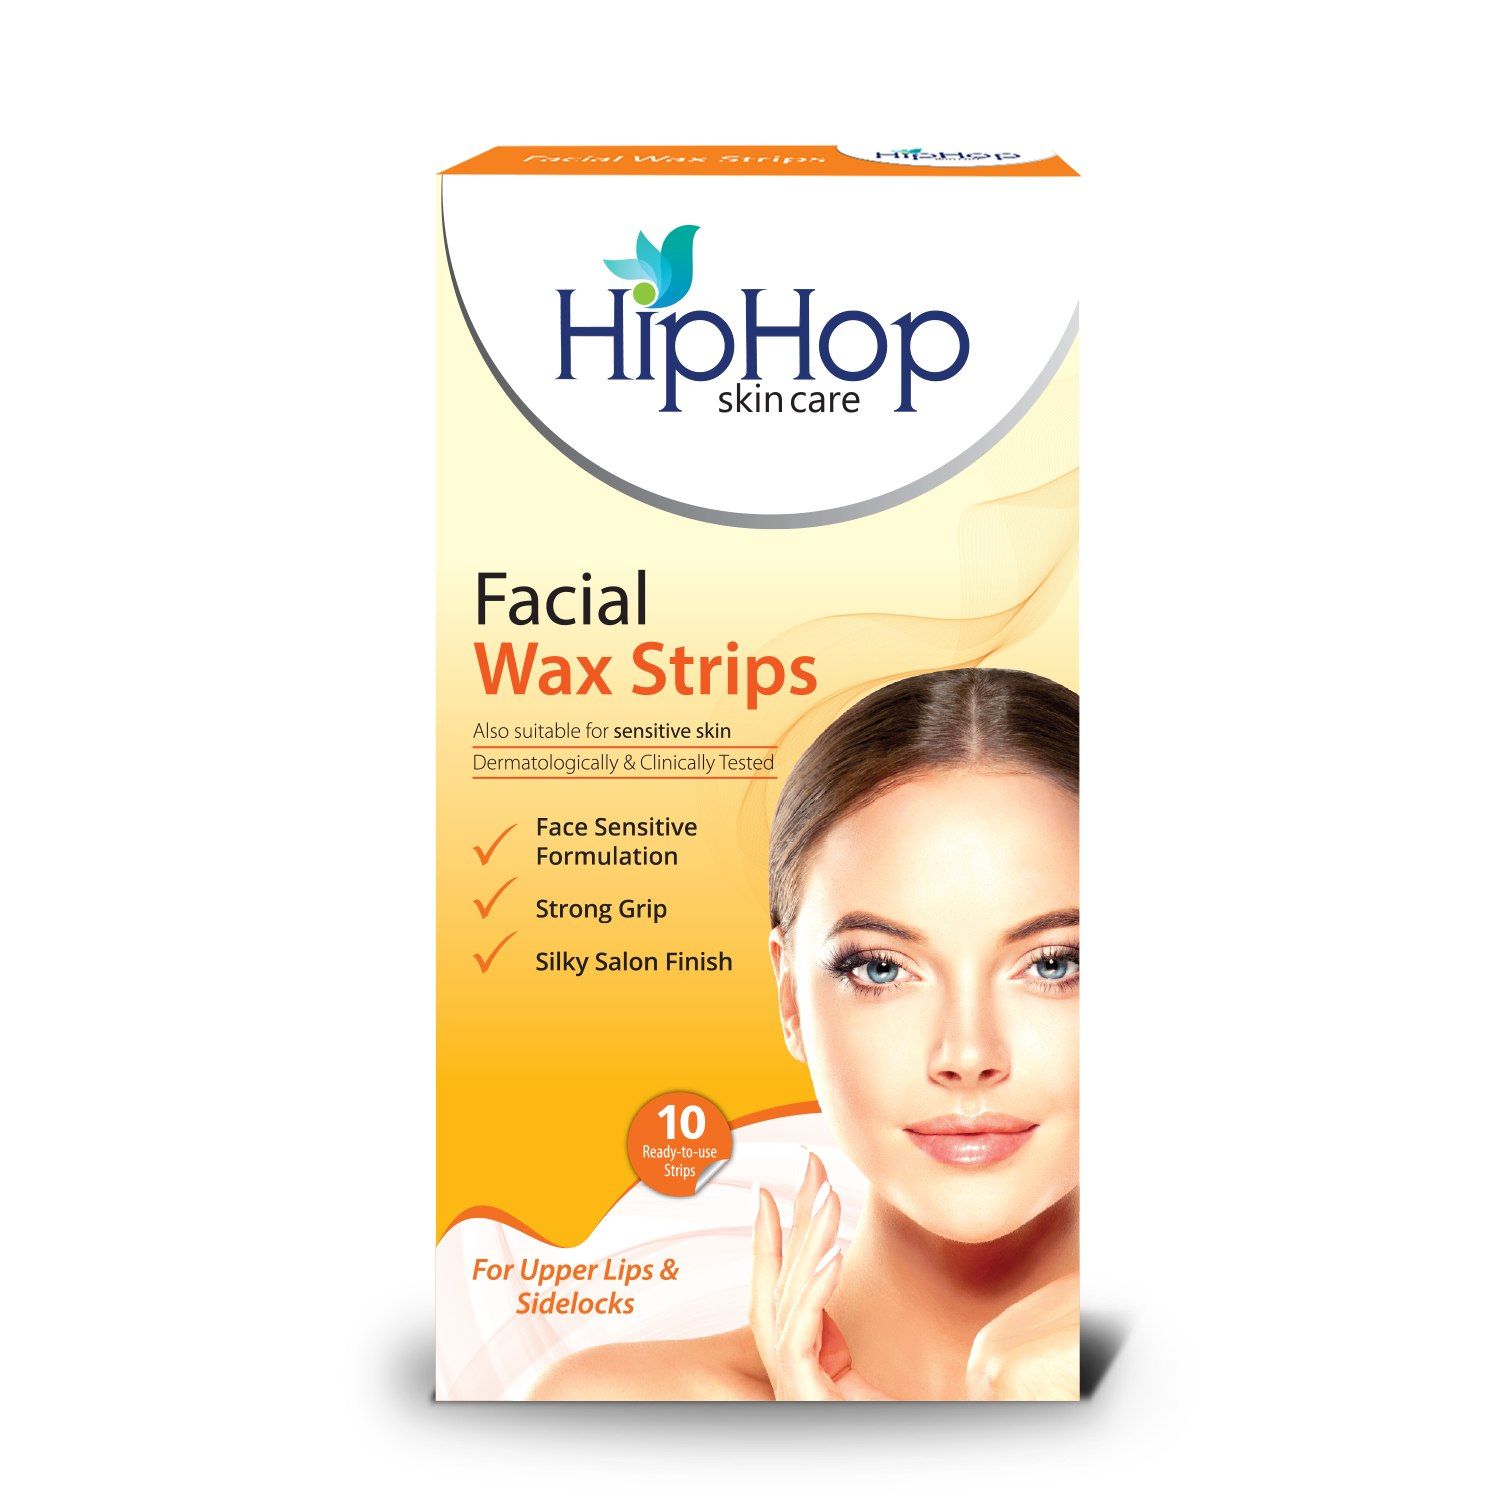 Buy HipHop Skincare Facial Wax Strips for Sensitive Skin, For Instant Hair Removal (Upper Lip, Sideburns, Forehead, Chin) with Cleansing Wipes (10 Strips) - Purplle